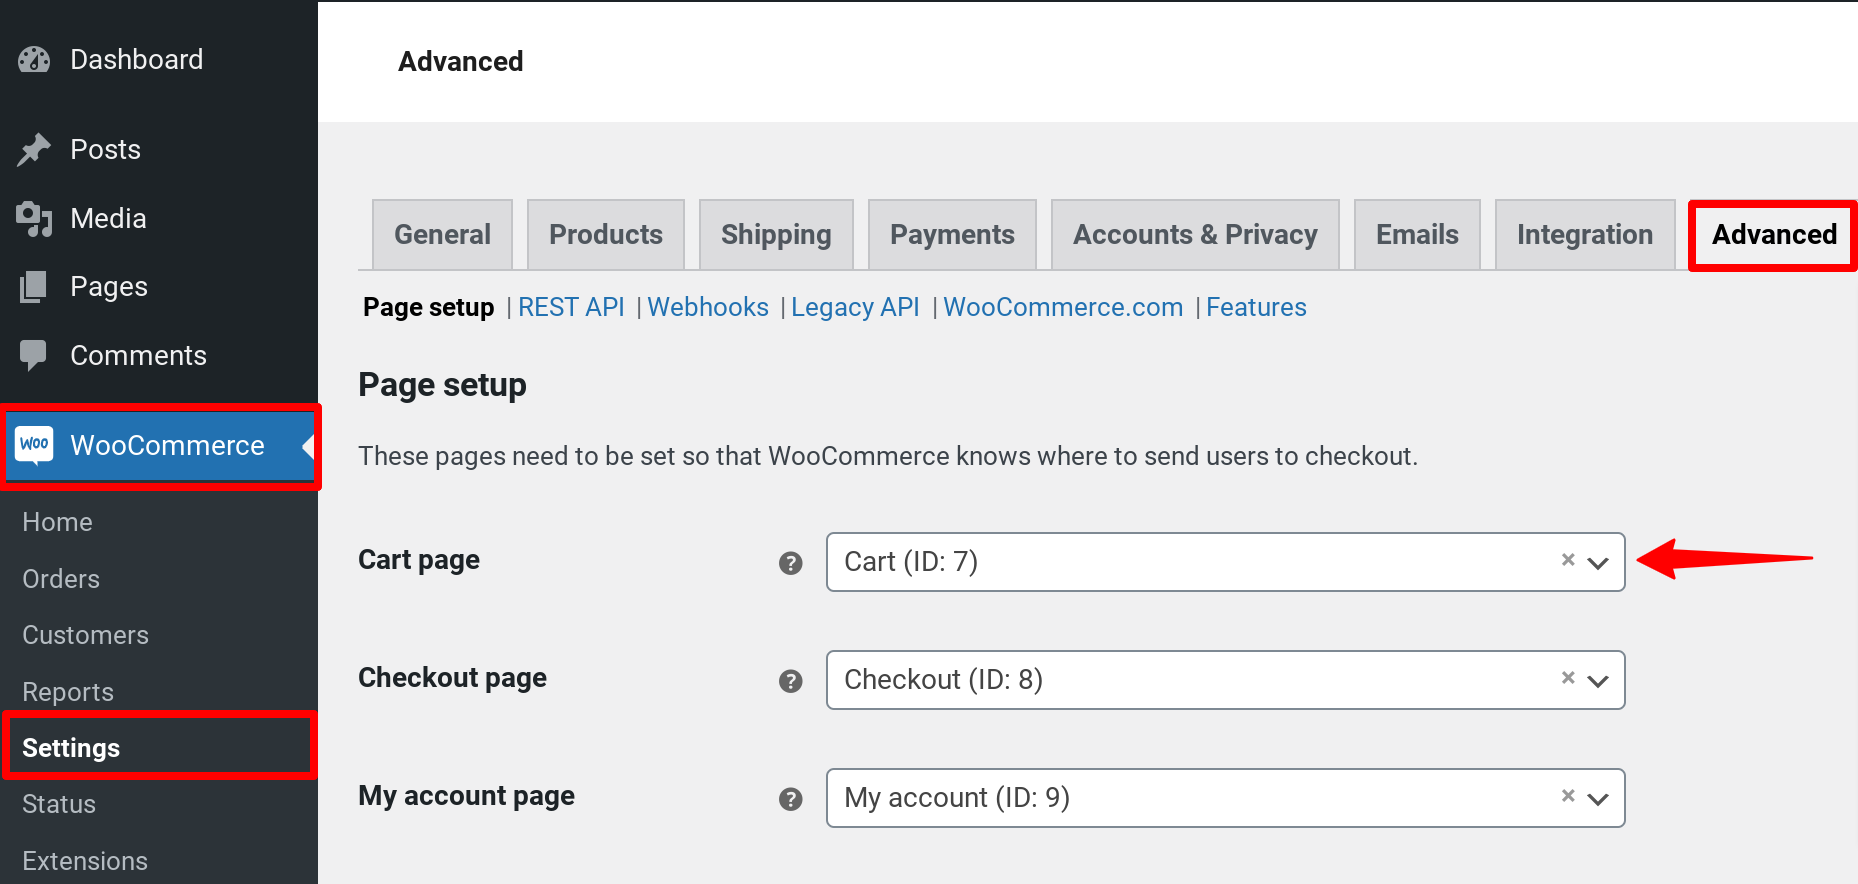 Redirecting cart page traffic to the checkout page - WooCommerce